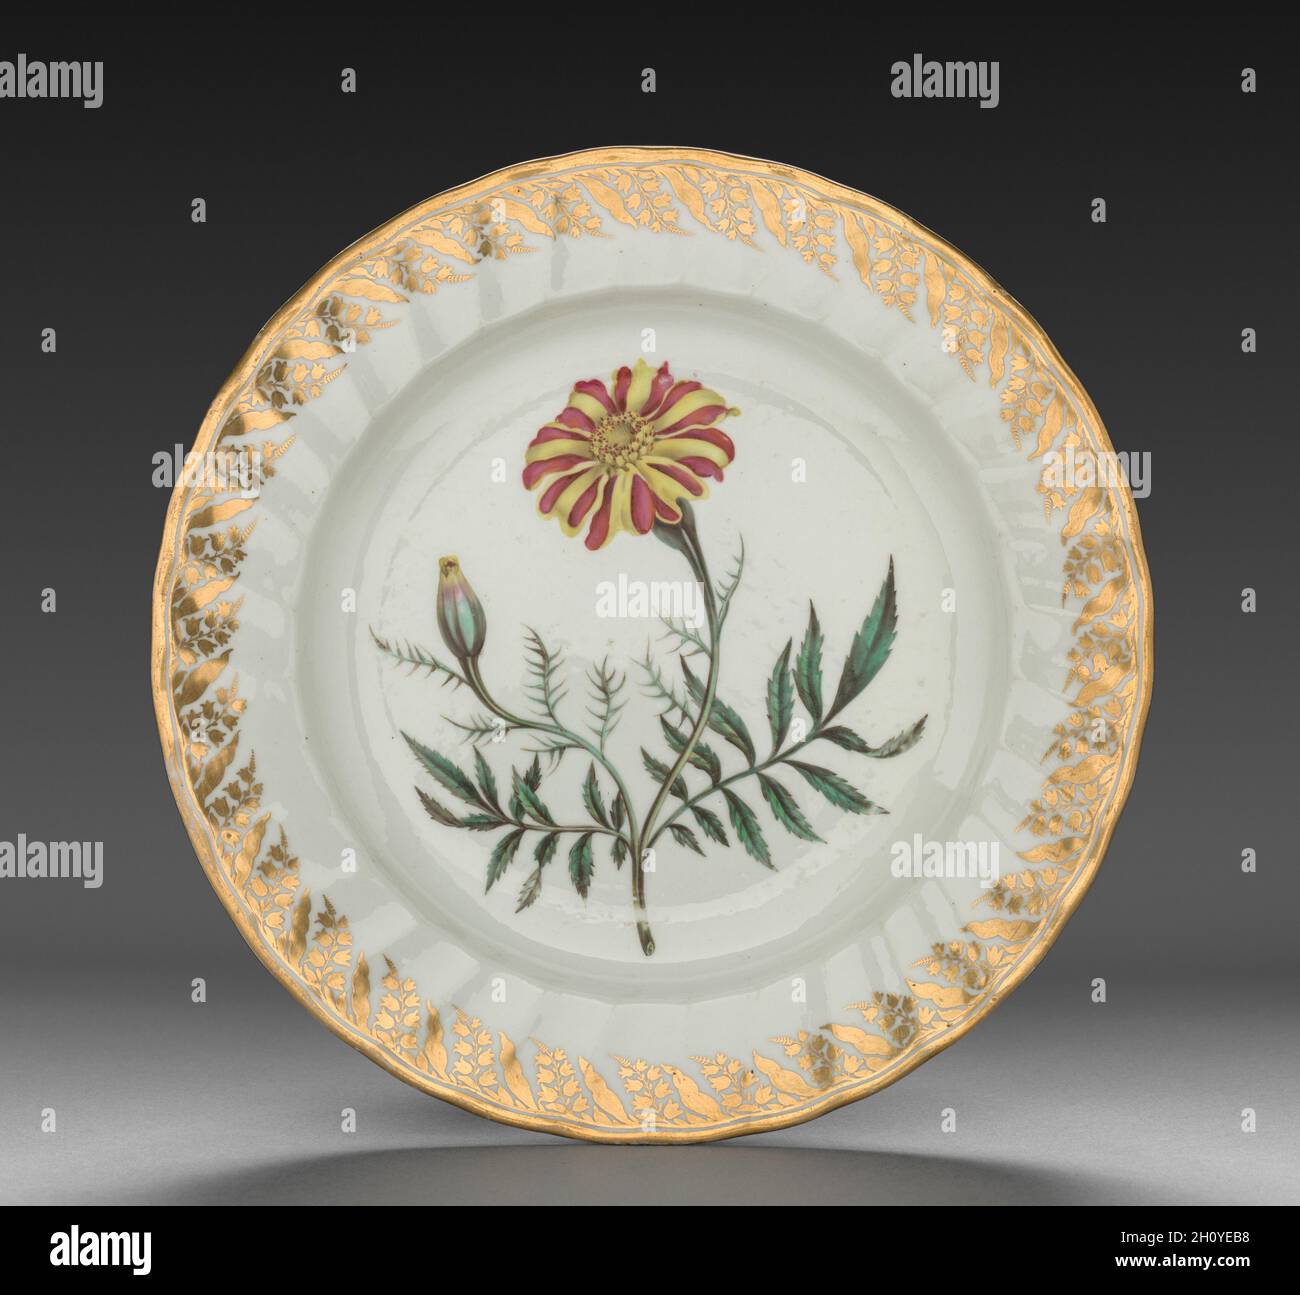 Plate from Dessert Service: French Marigold, c. 1800. Derby (Crown Derby Period) (British). Porcelain; diameter: 23.4 cm (9 3/16 in.); overall: 3.4 cm (1 5/16 in.).  Each dish is decorated with recognizable plants, the names of which are inscribed on the base in both Latin and English. Identifying the blossoms only became customary in the late 18th century when a single piece of porcelain was decorated with one species, and flowers were represented along with leaves, stems, seed pods, and roots. All of this reflects Carolus Linnaeus’s recent invention of a scientific method to categorize all k Stock Photo